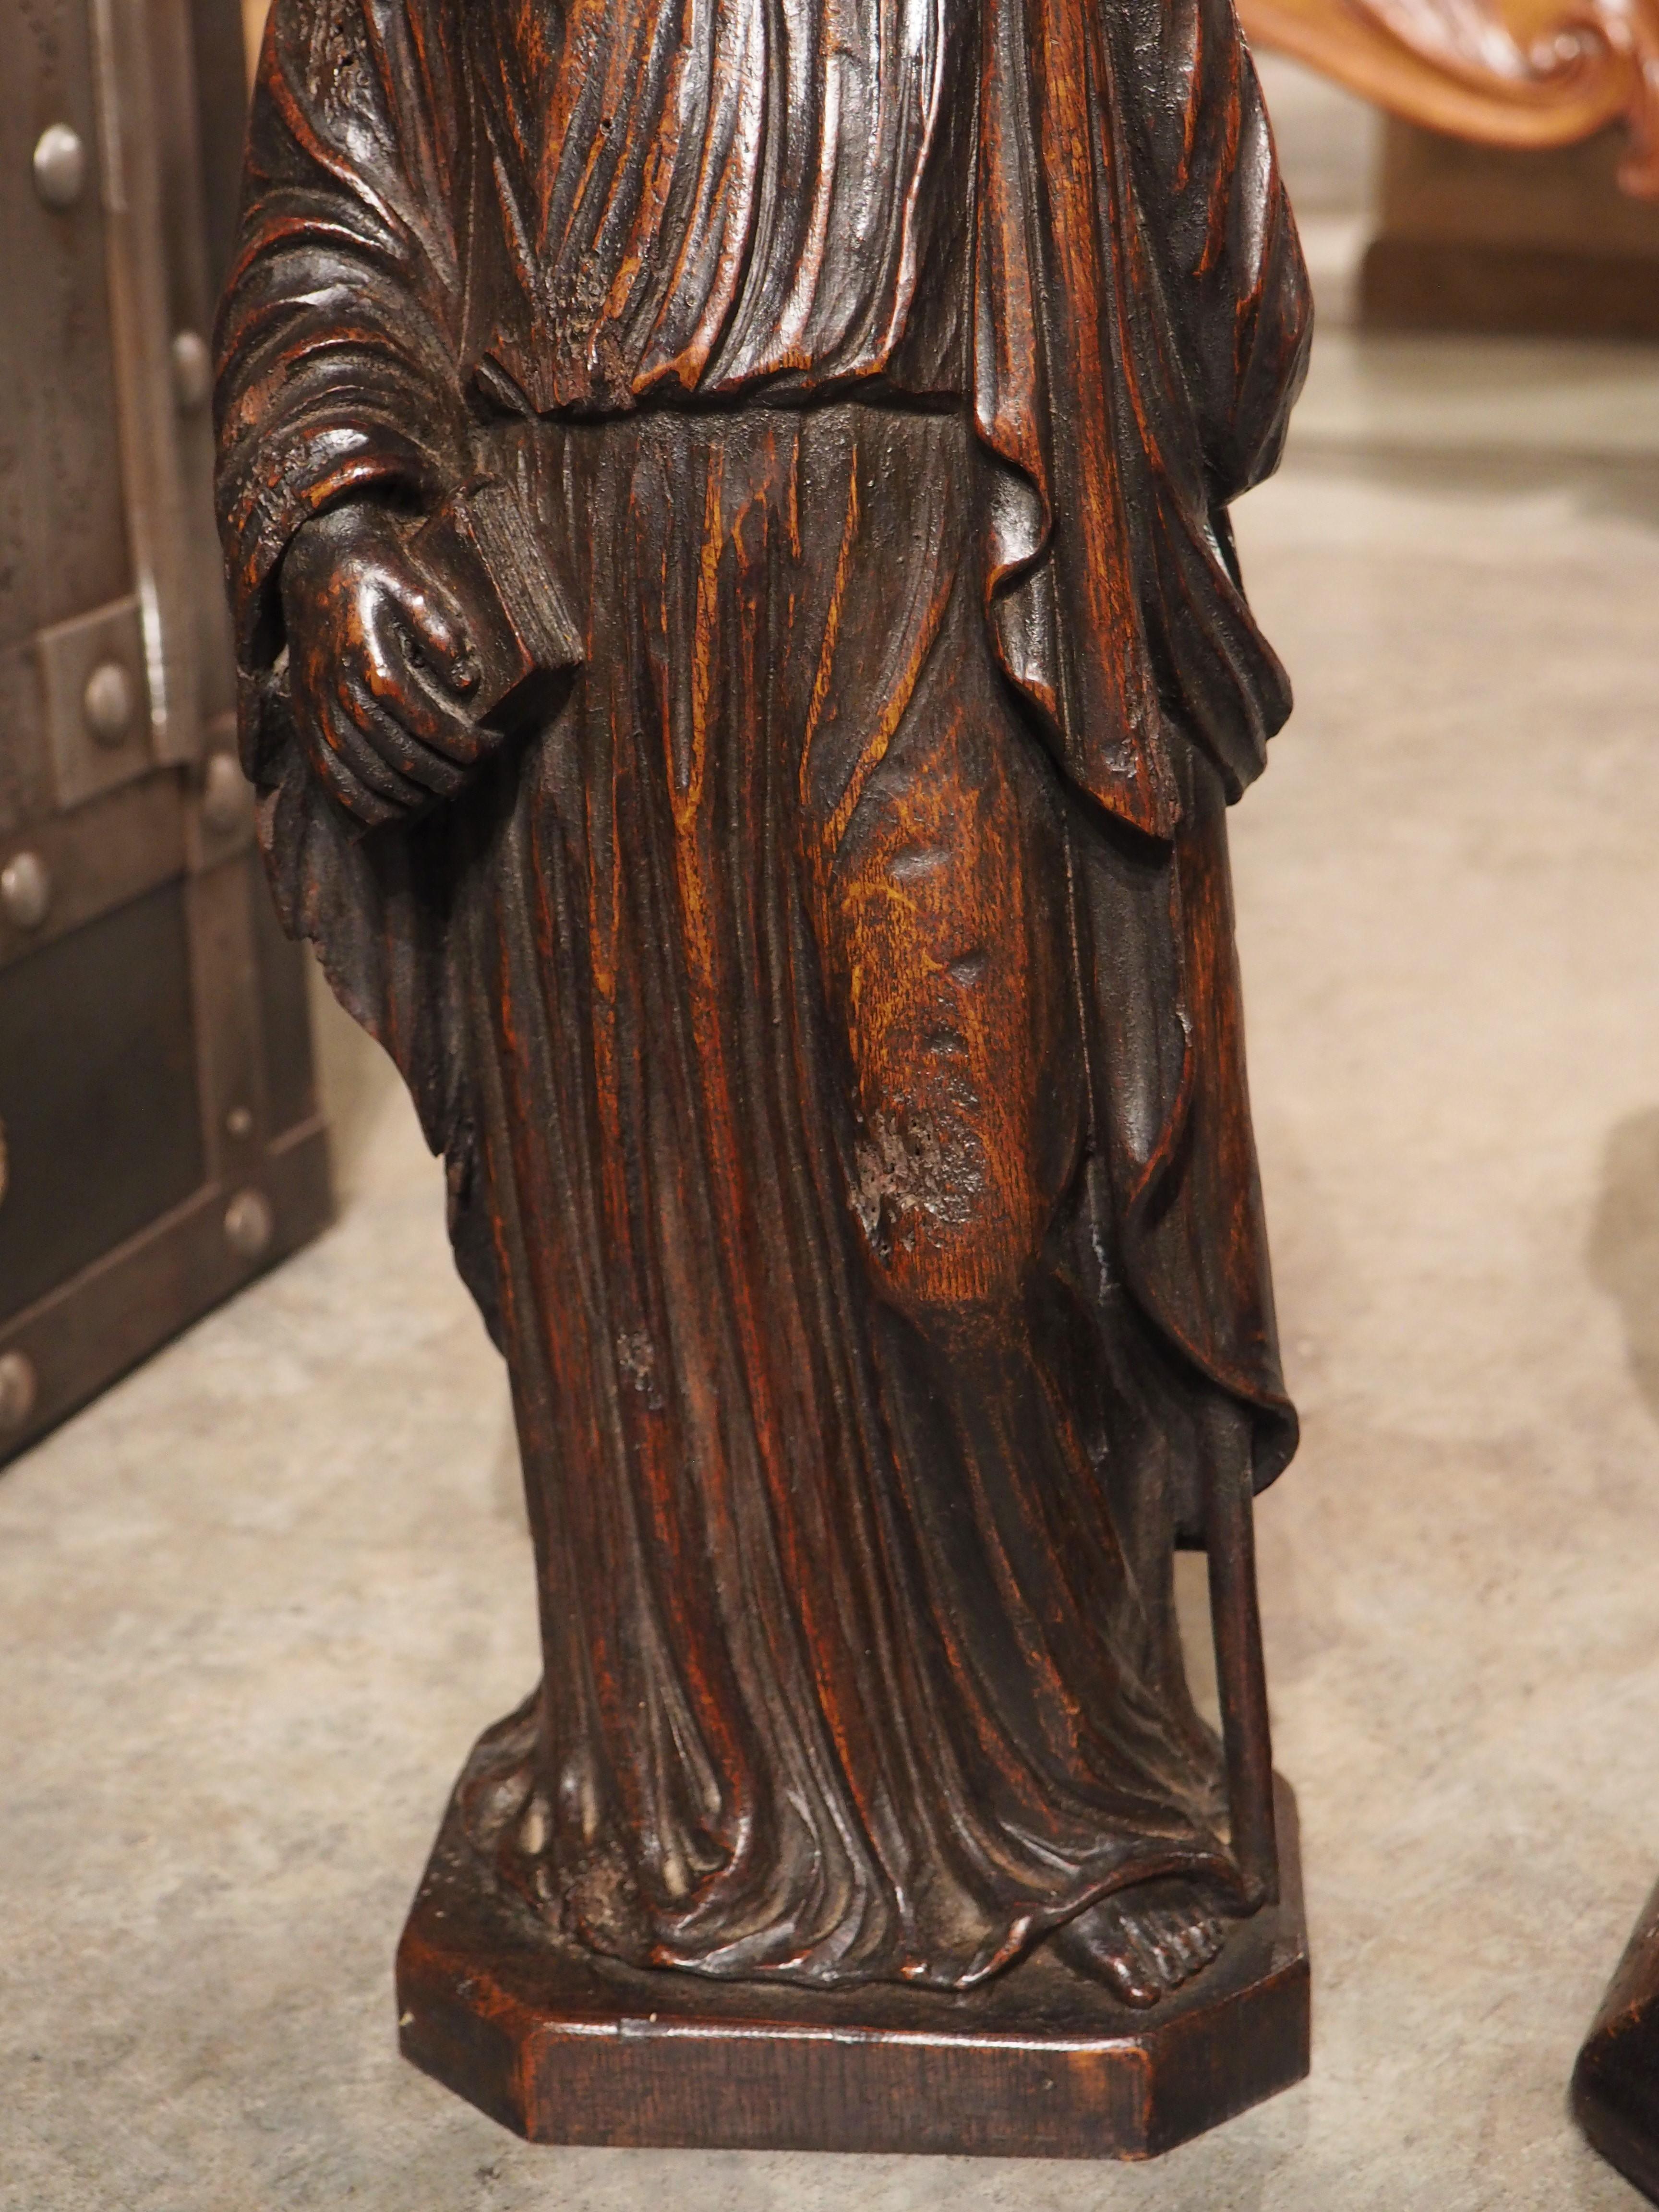 Circa 1800 Carved Oak Sculptures of the Apostles, James, John, Peter, and Paul For Sale 5